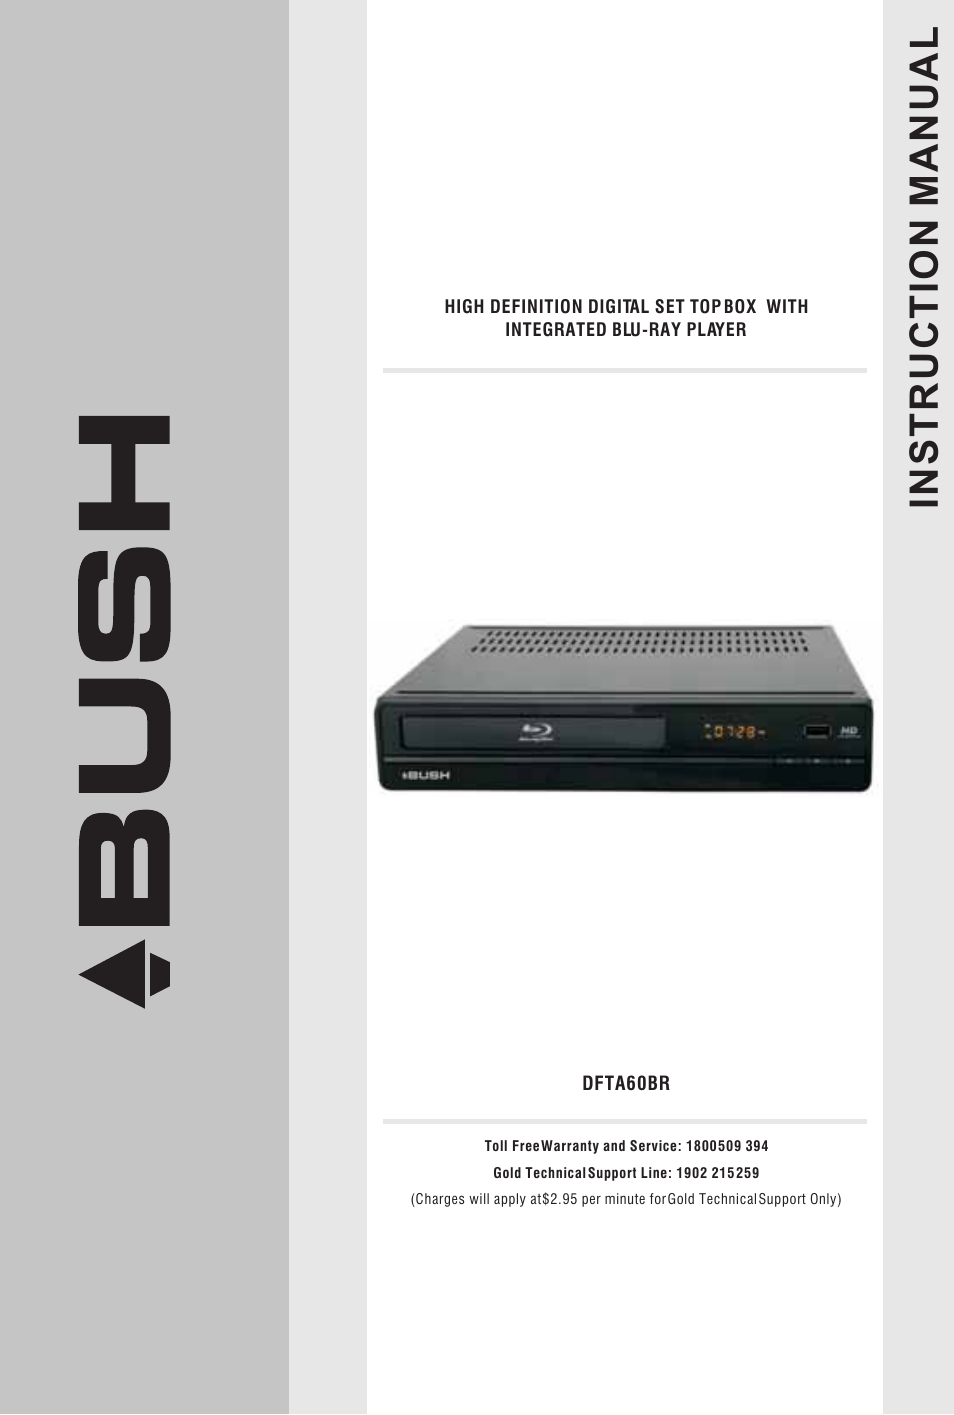 BUSH High Definition Digital Set Top Box with Integrated Blu-Ray Player  DFTA60BR User Manual | 27 pages